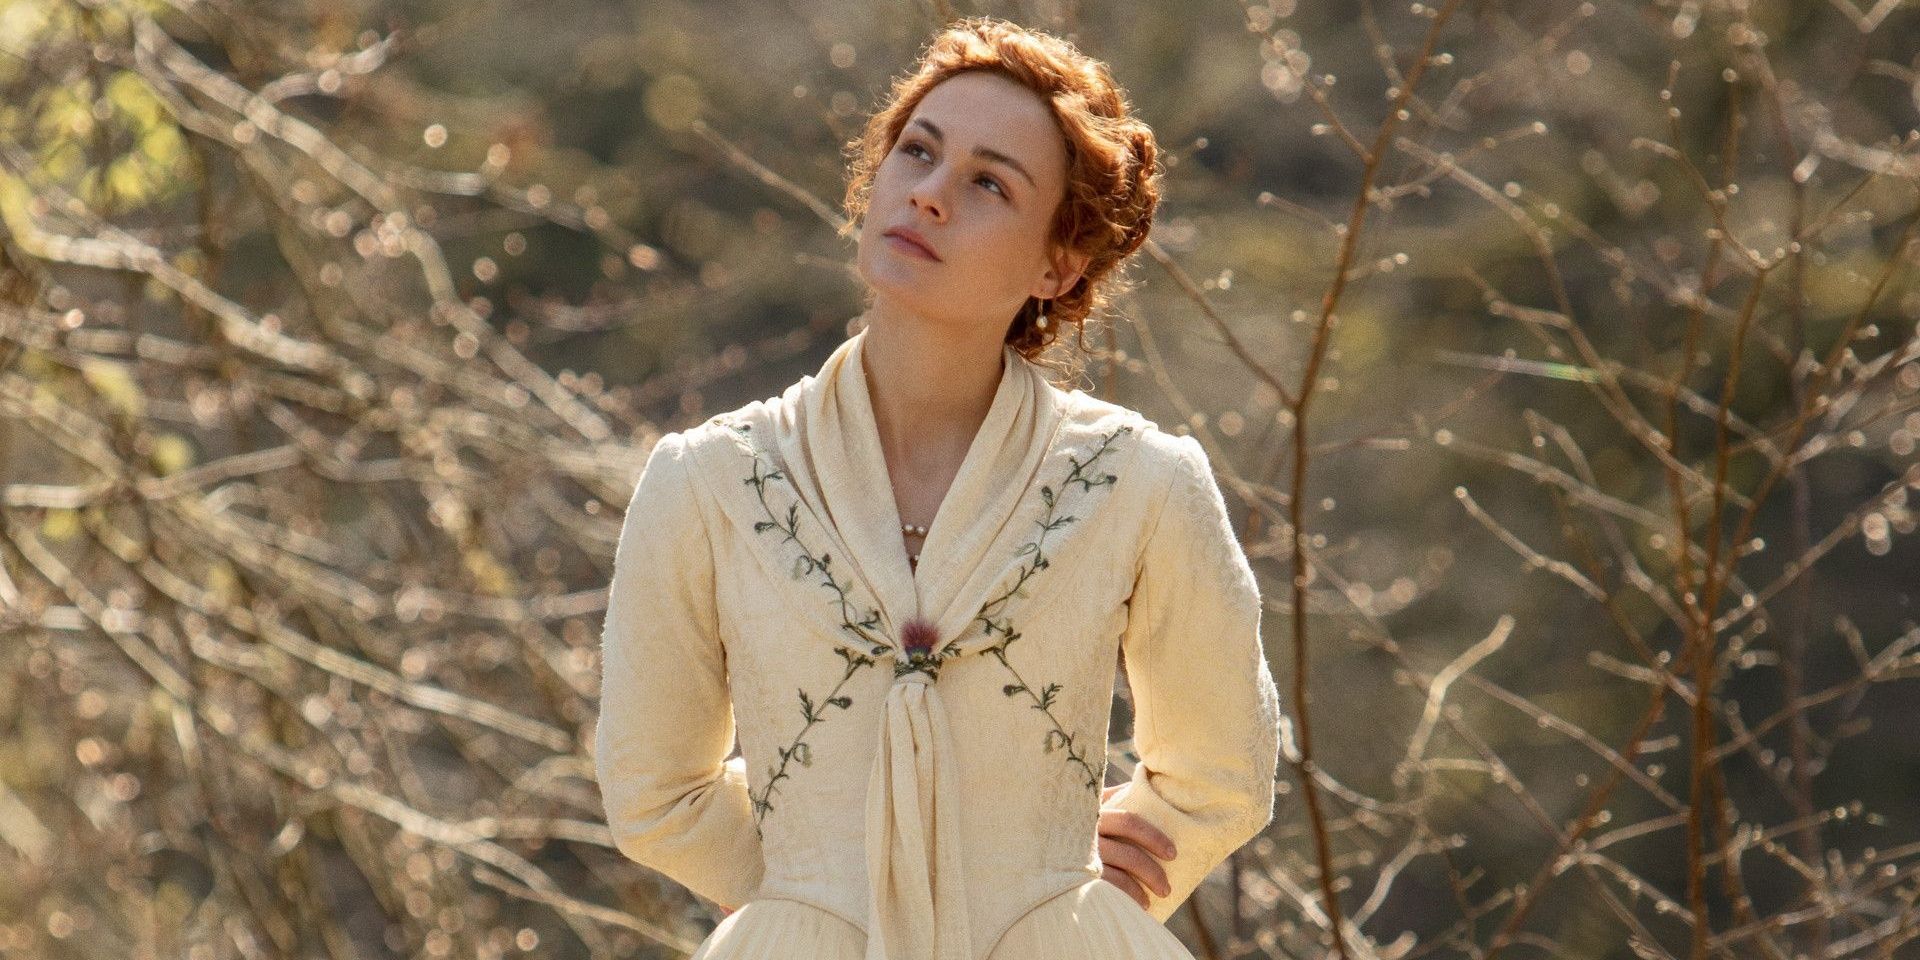 Brianna looks on in her wedding dress in Outlander 